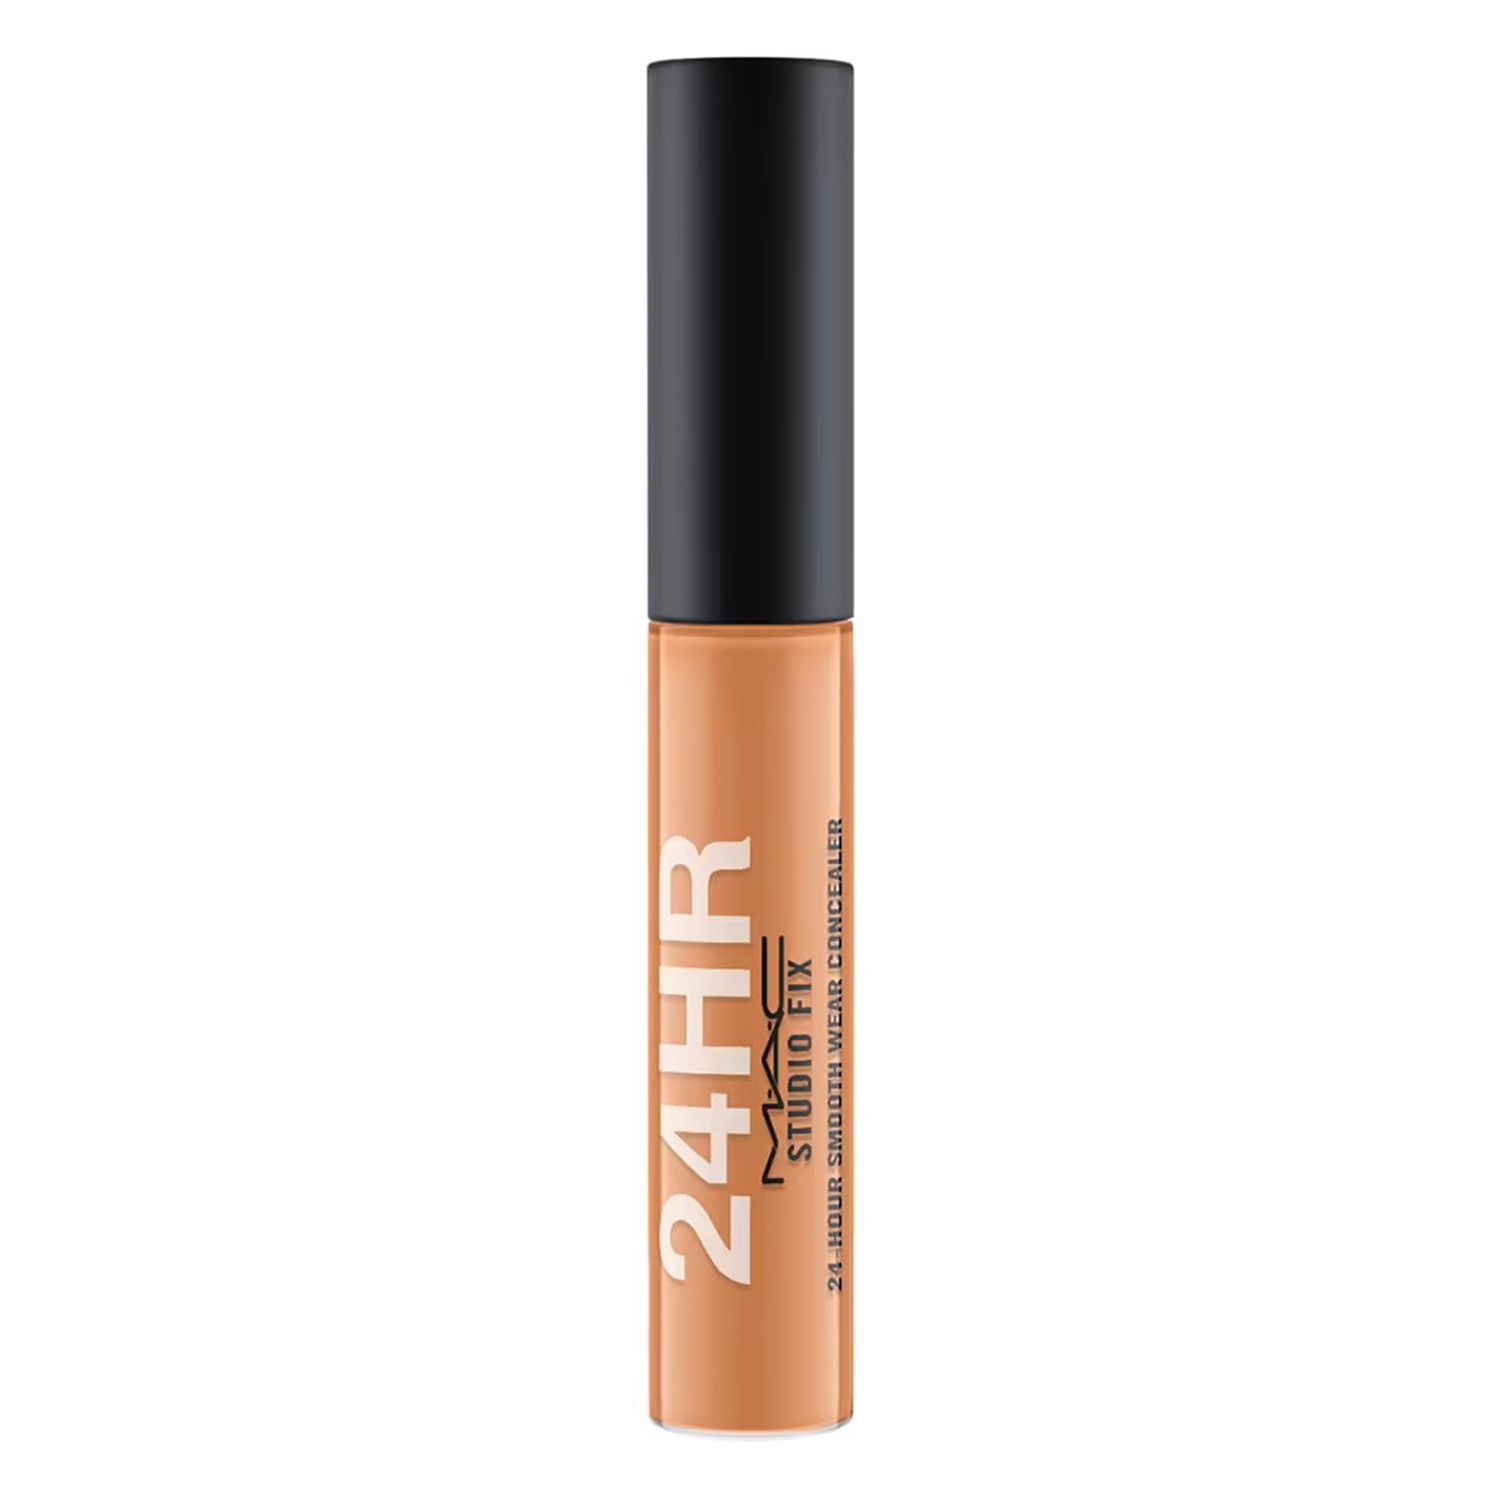 M.A.C | M.A.C Studio Fix 24-Hour Smooth Wear Concealer - NW42 (7ml)